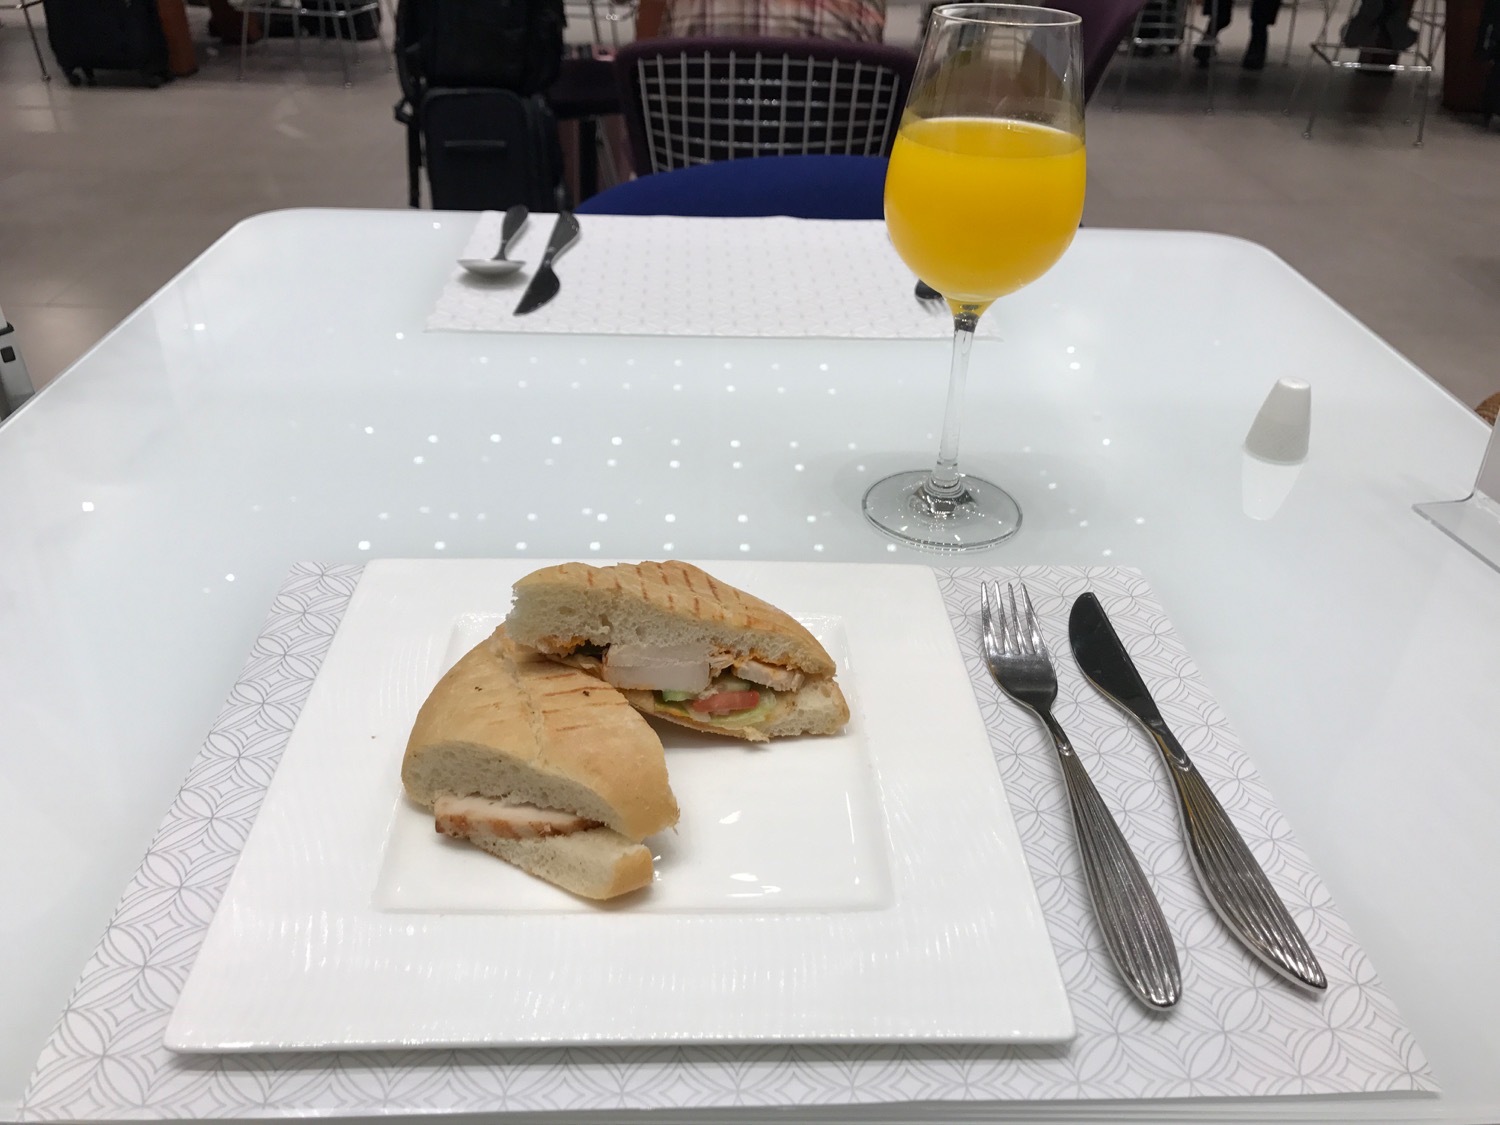 a plate of sandwiches and a glass of juice